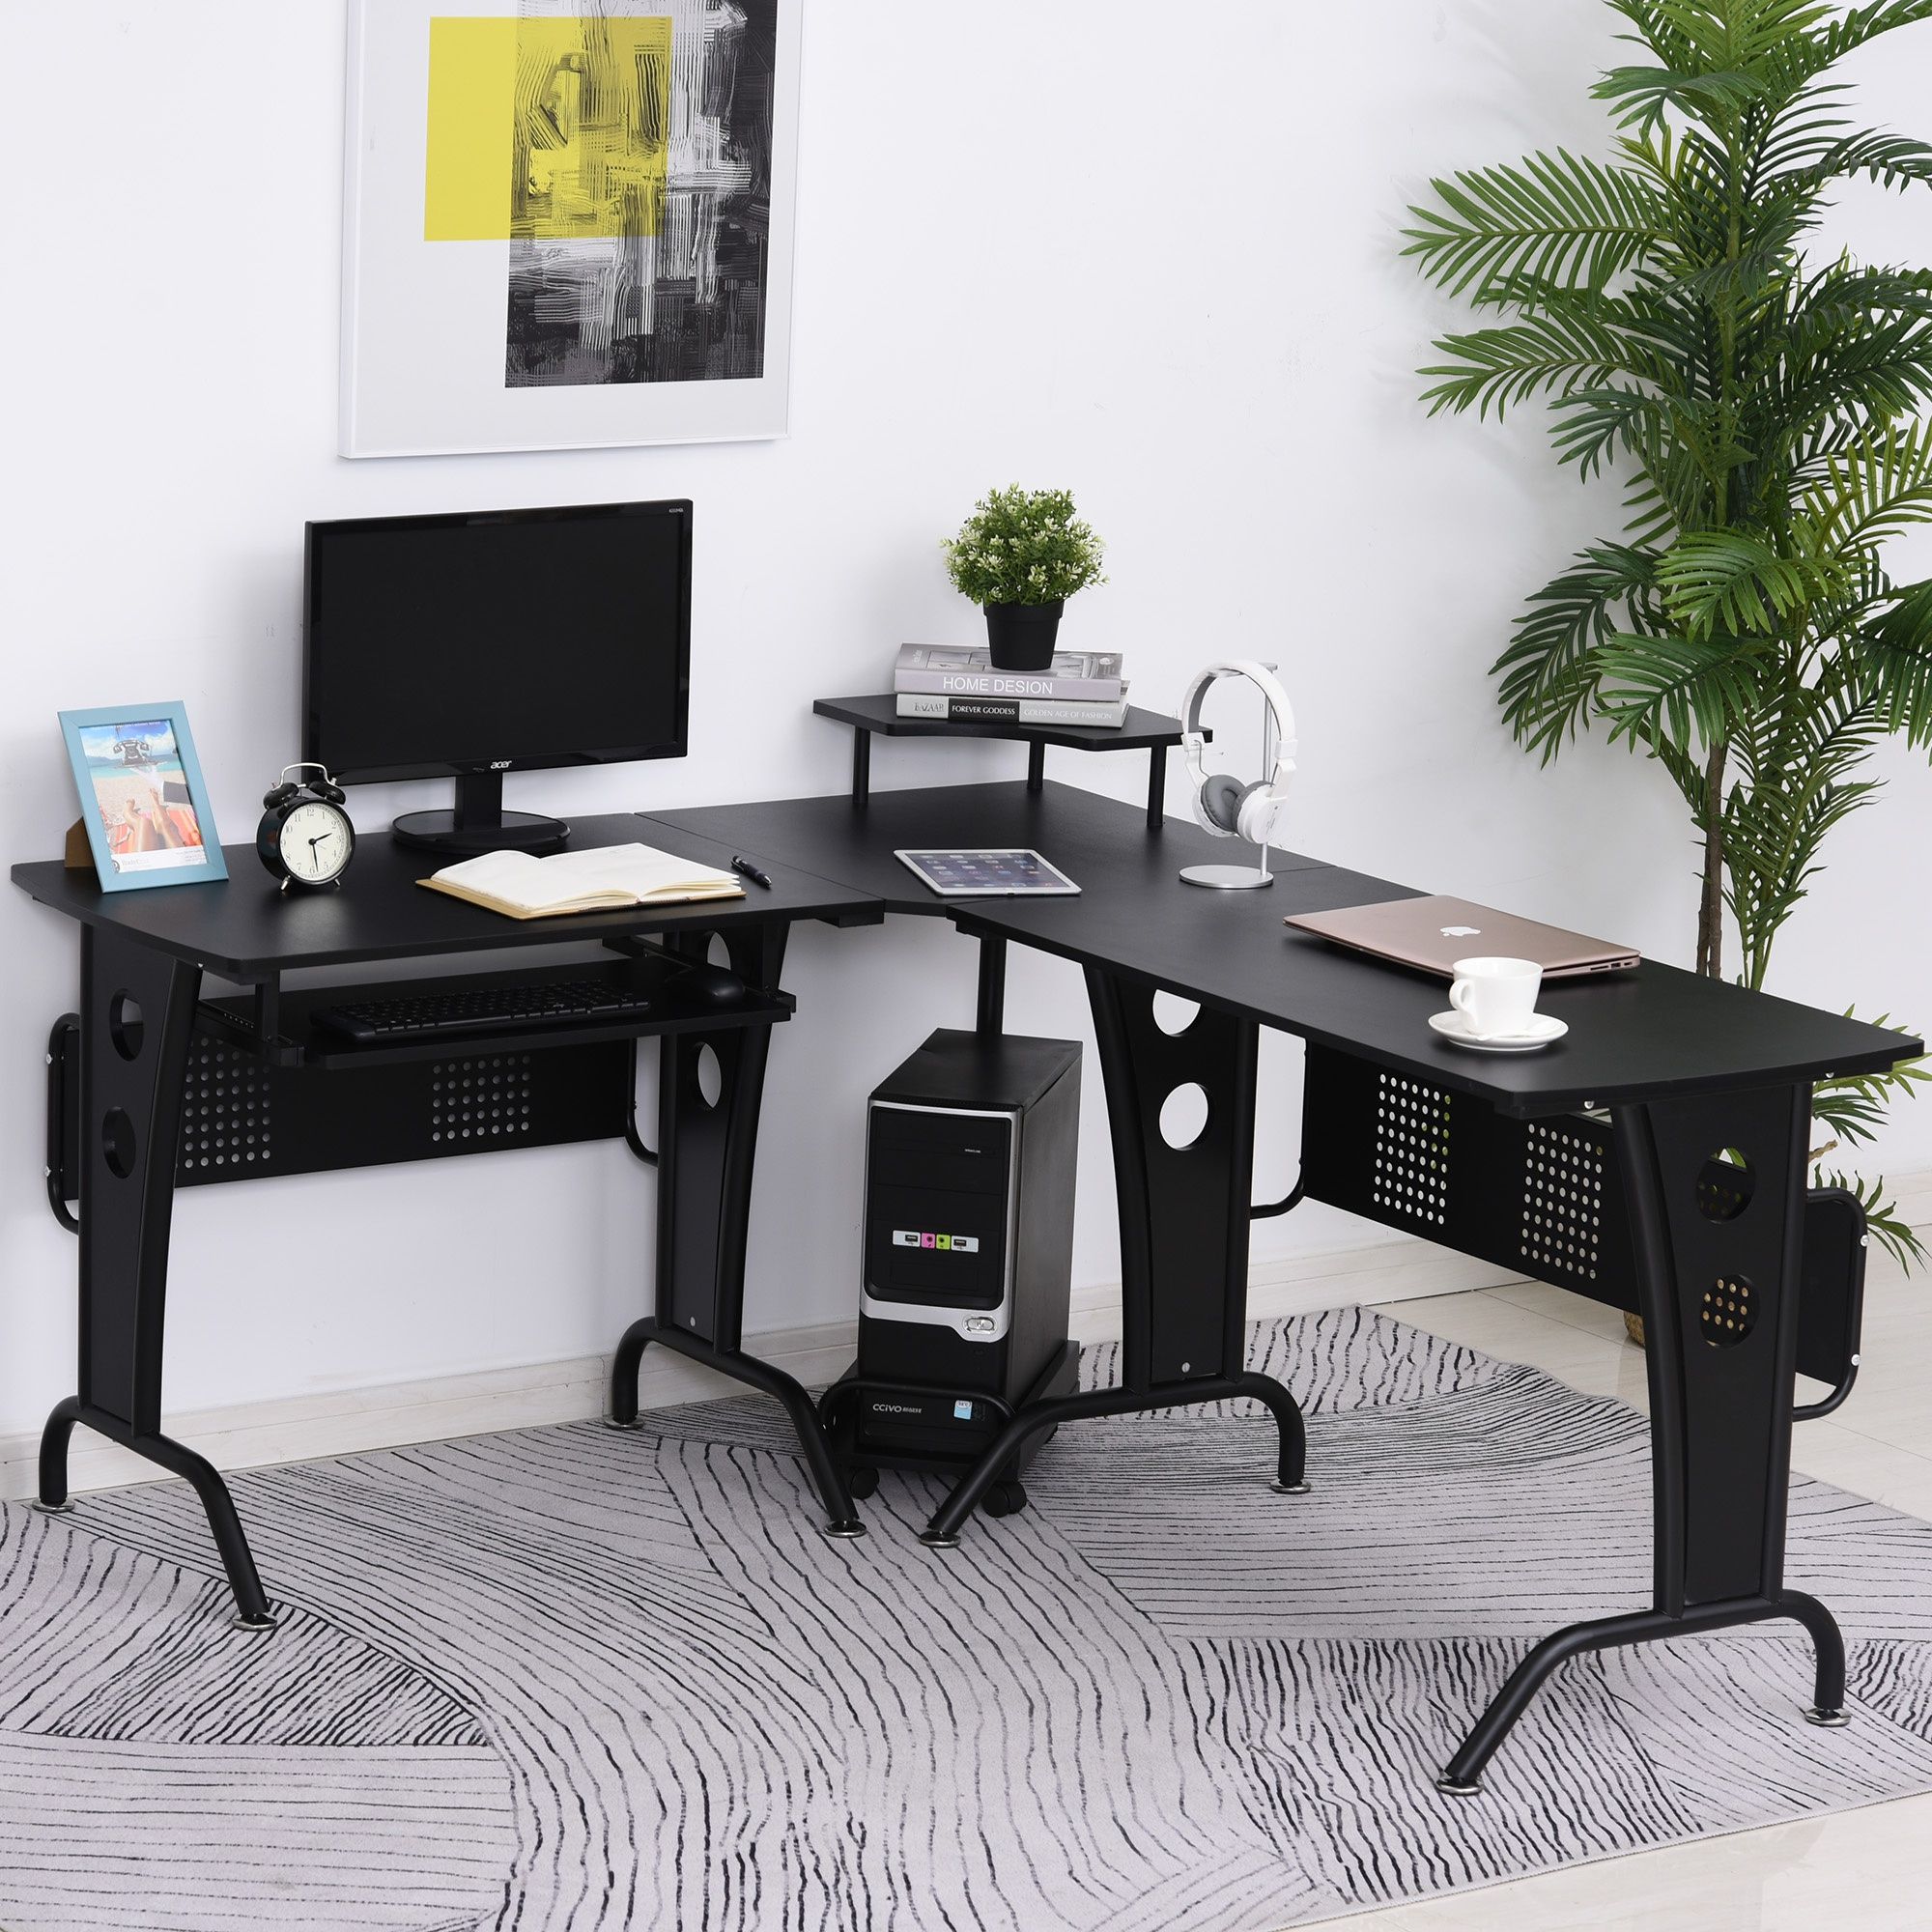 Homcom Steel Mdf Top L Shaped Corner Desk W/ Keyboard Tray Black For Natural Wood And White Metal Office Desks (View 4 of 15)